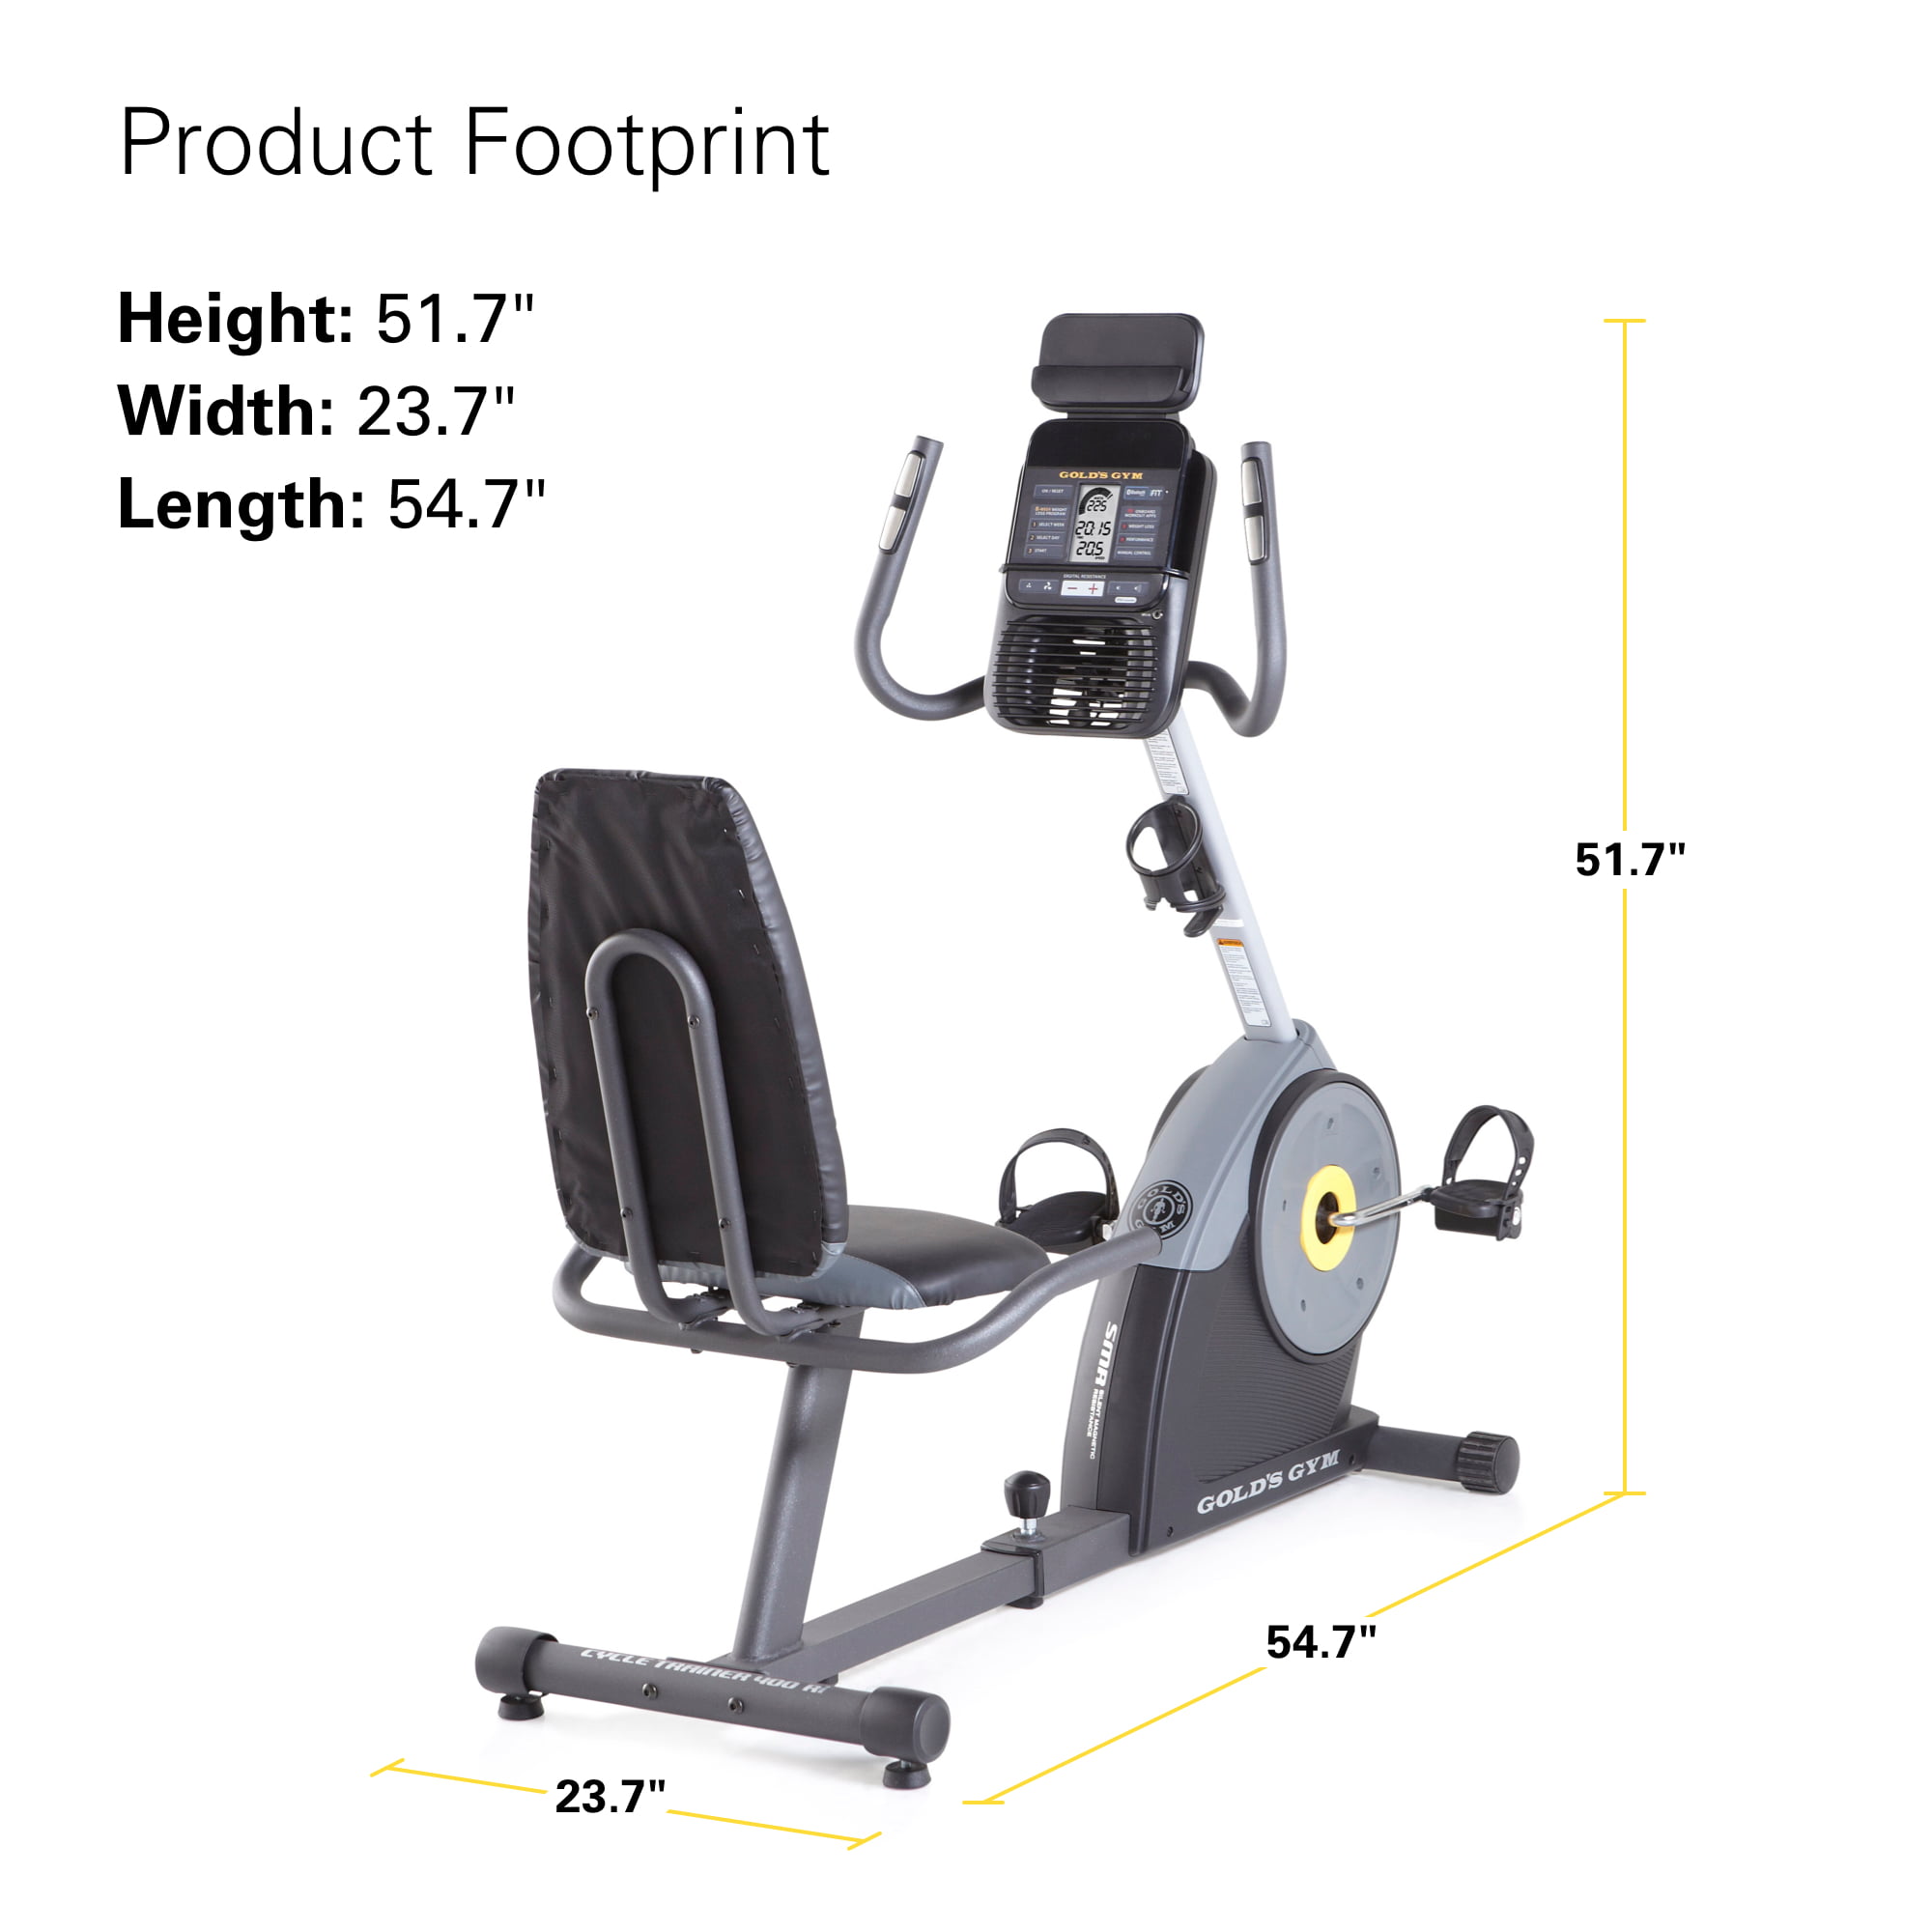 Gold's Gym 290c Cycle Trainer Manual | Exercise Bike ...